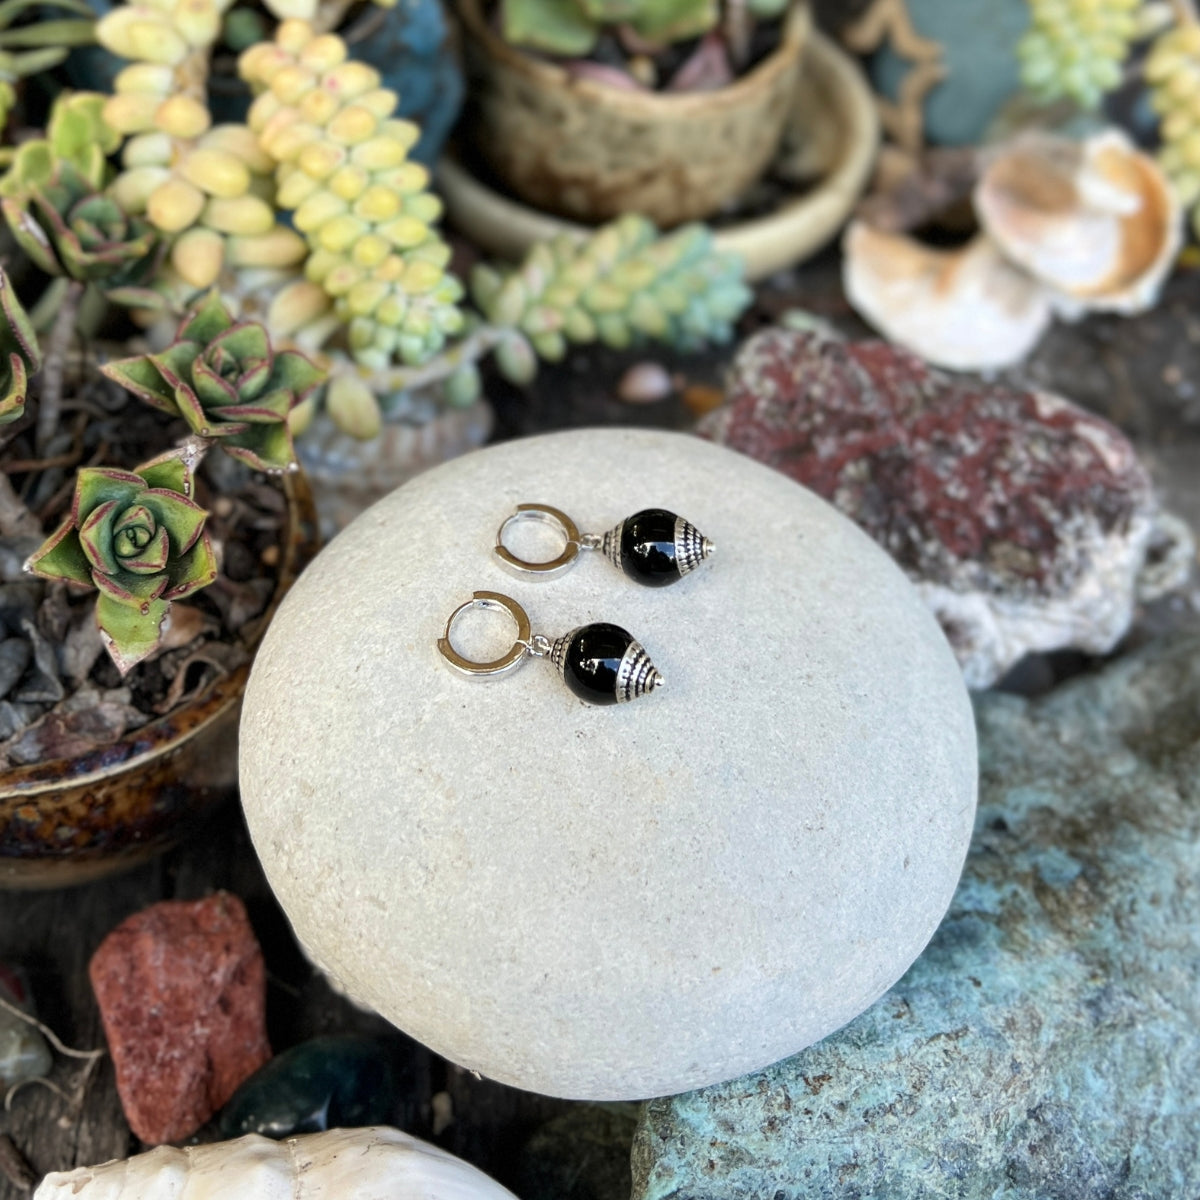 At the heart of the "Himalaya Harmony Earrings"  is a piece of Onyx gemstone. Onyx helps one have self-control and anchors one’s flighty energy into a more stable way of life. It is this stone of inner strength and endurance, helping one to carry even the most difficult task to completion. 